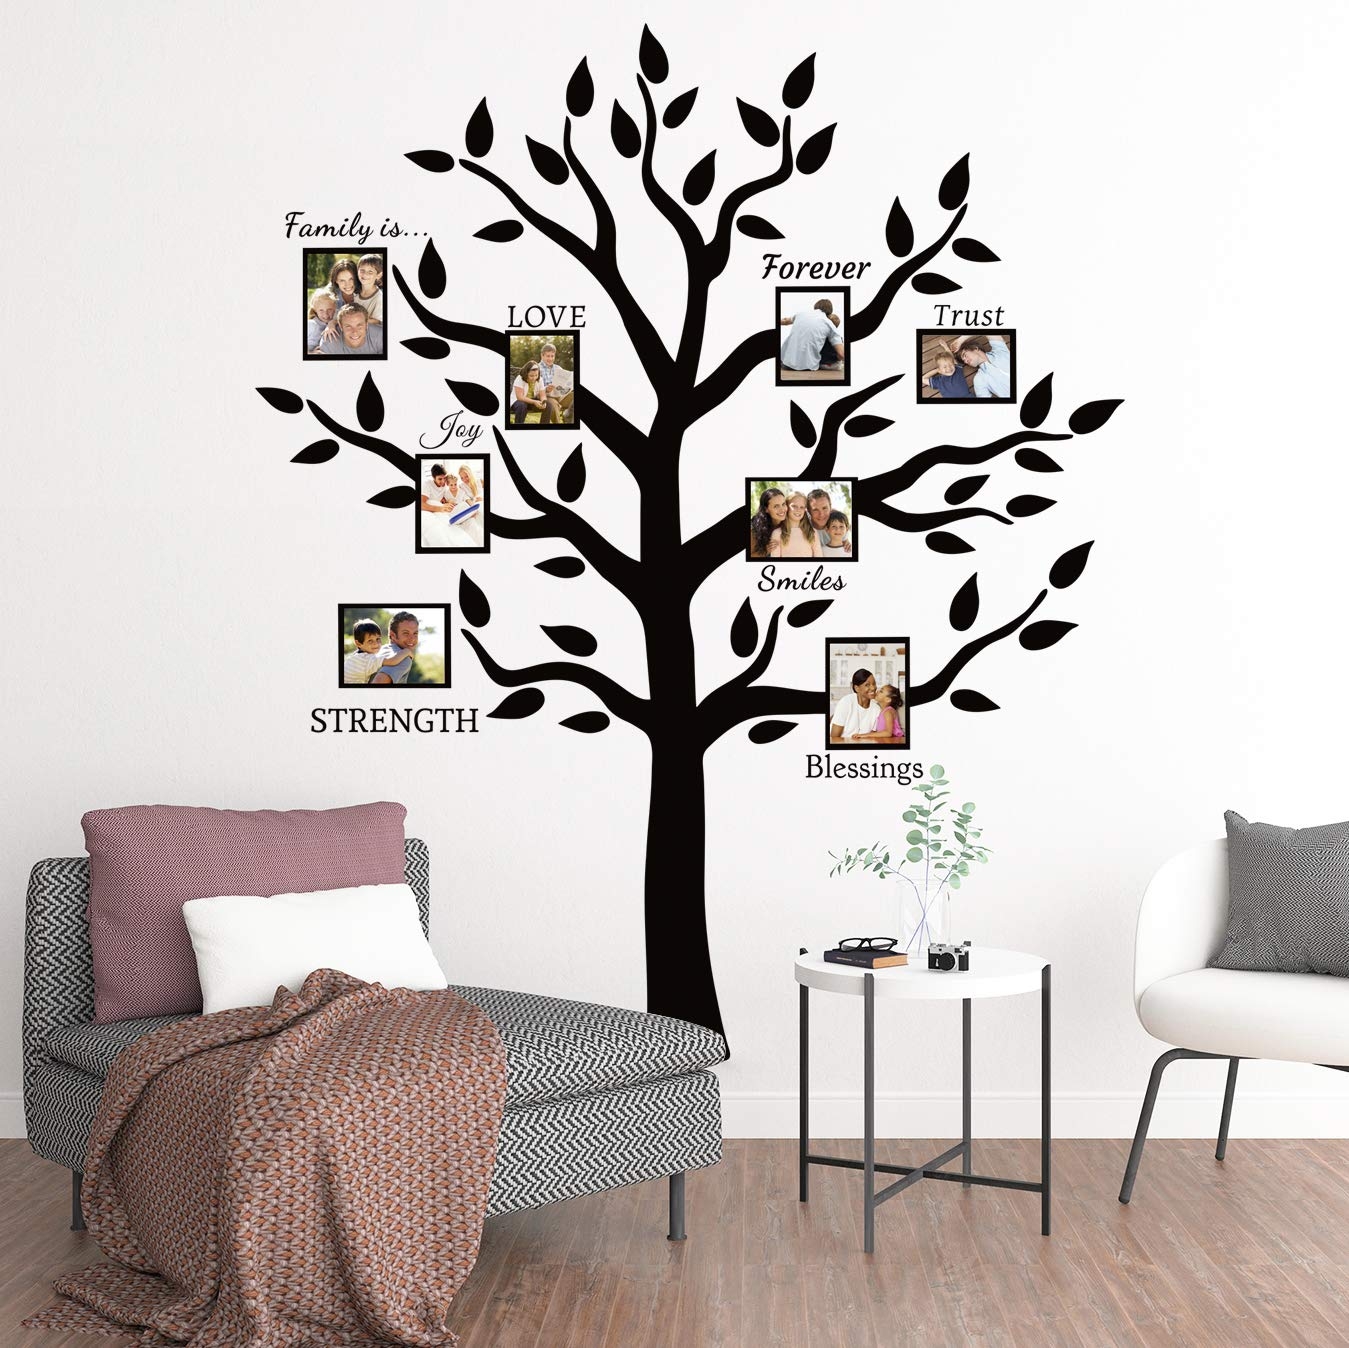 The Best Things in Life are The People We Love MoharWall Wall Decals Quote Living Room Warm Vinyl Art Wall Stickers Picture Frame Bedroom Decoration 